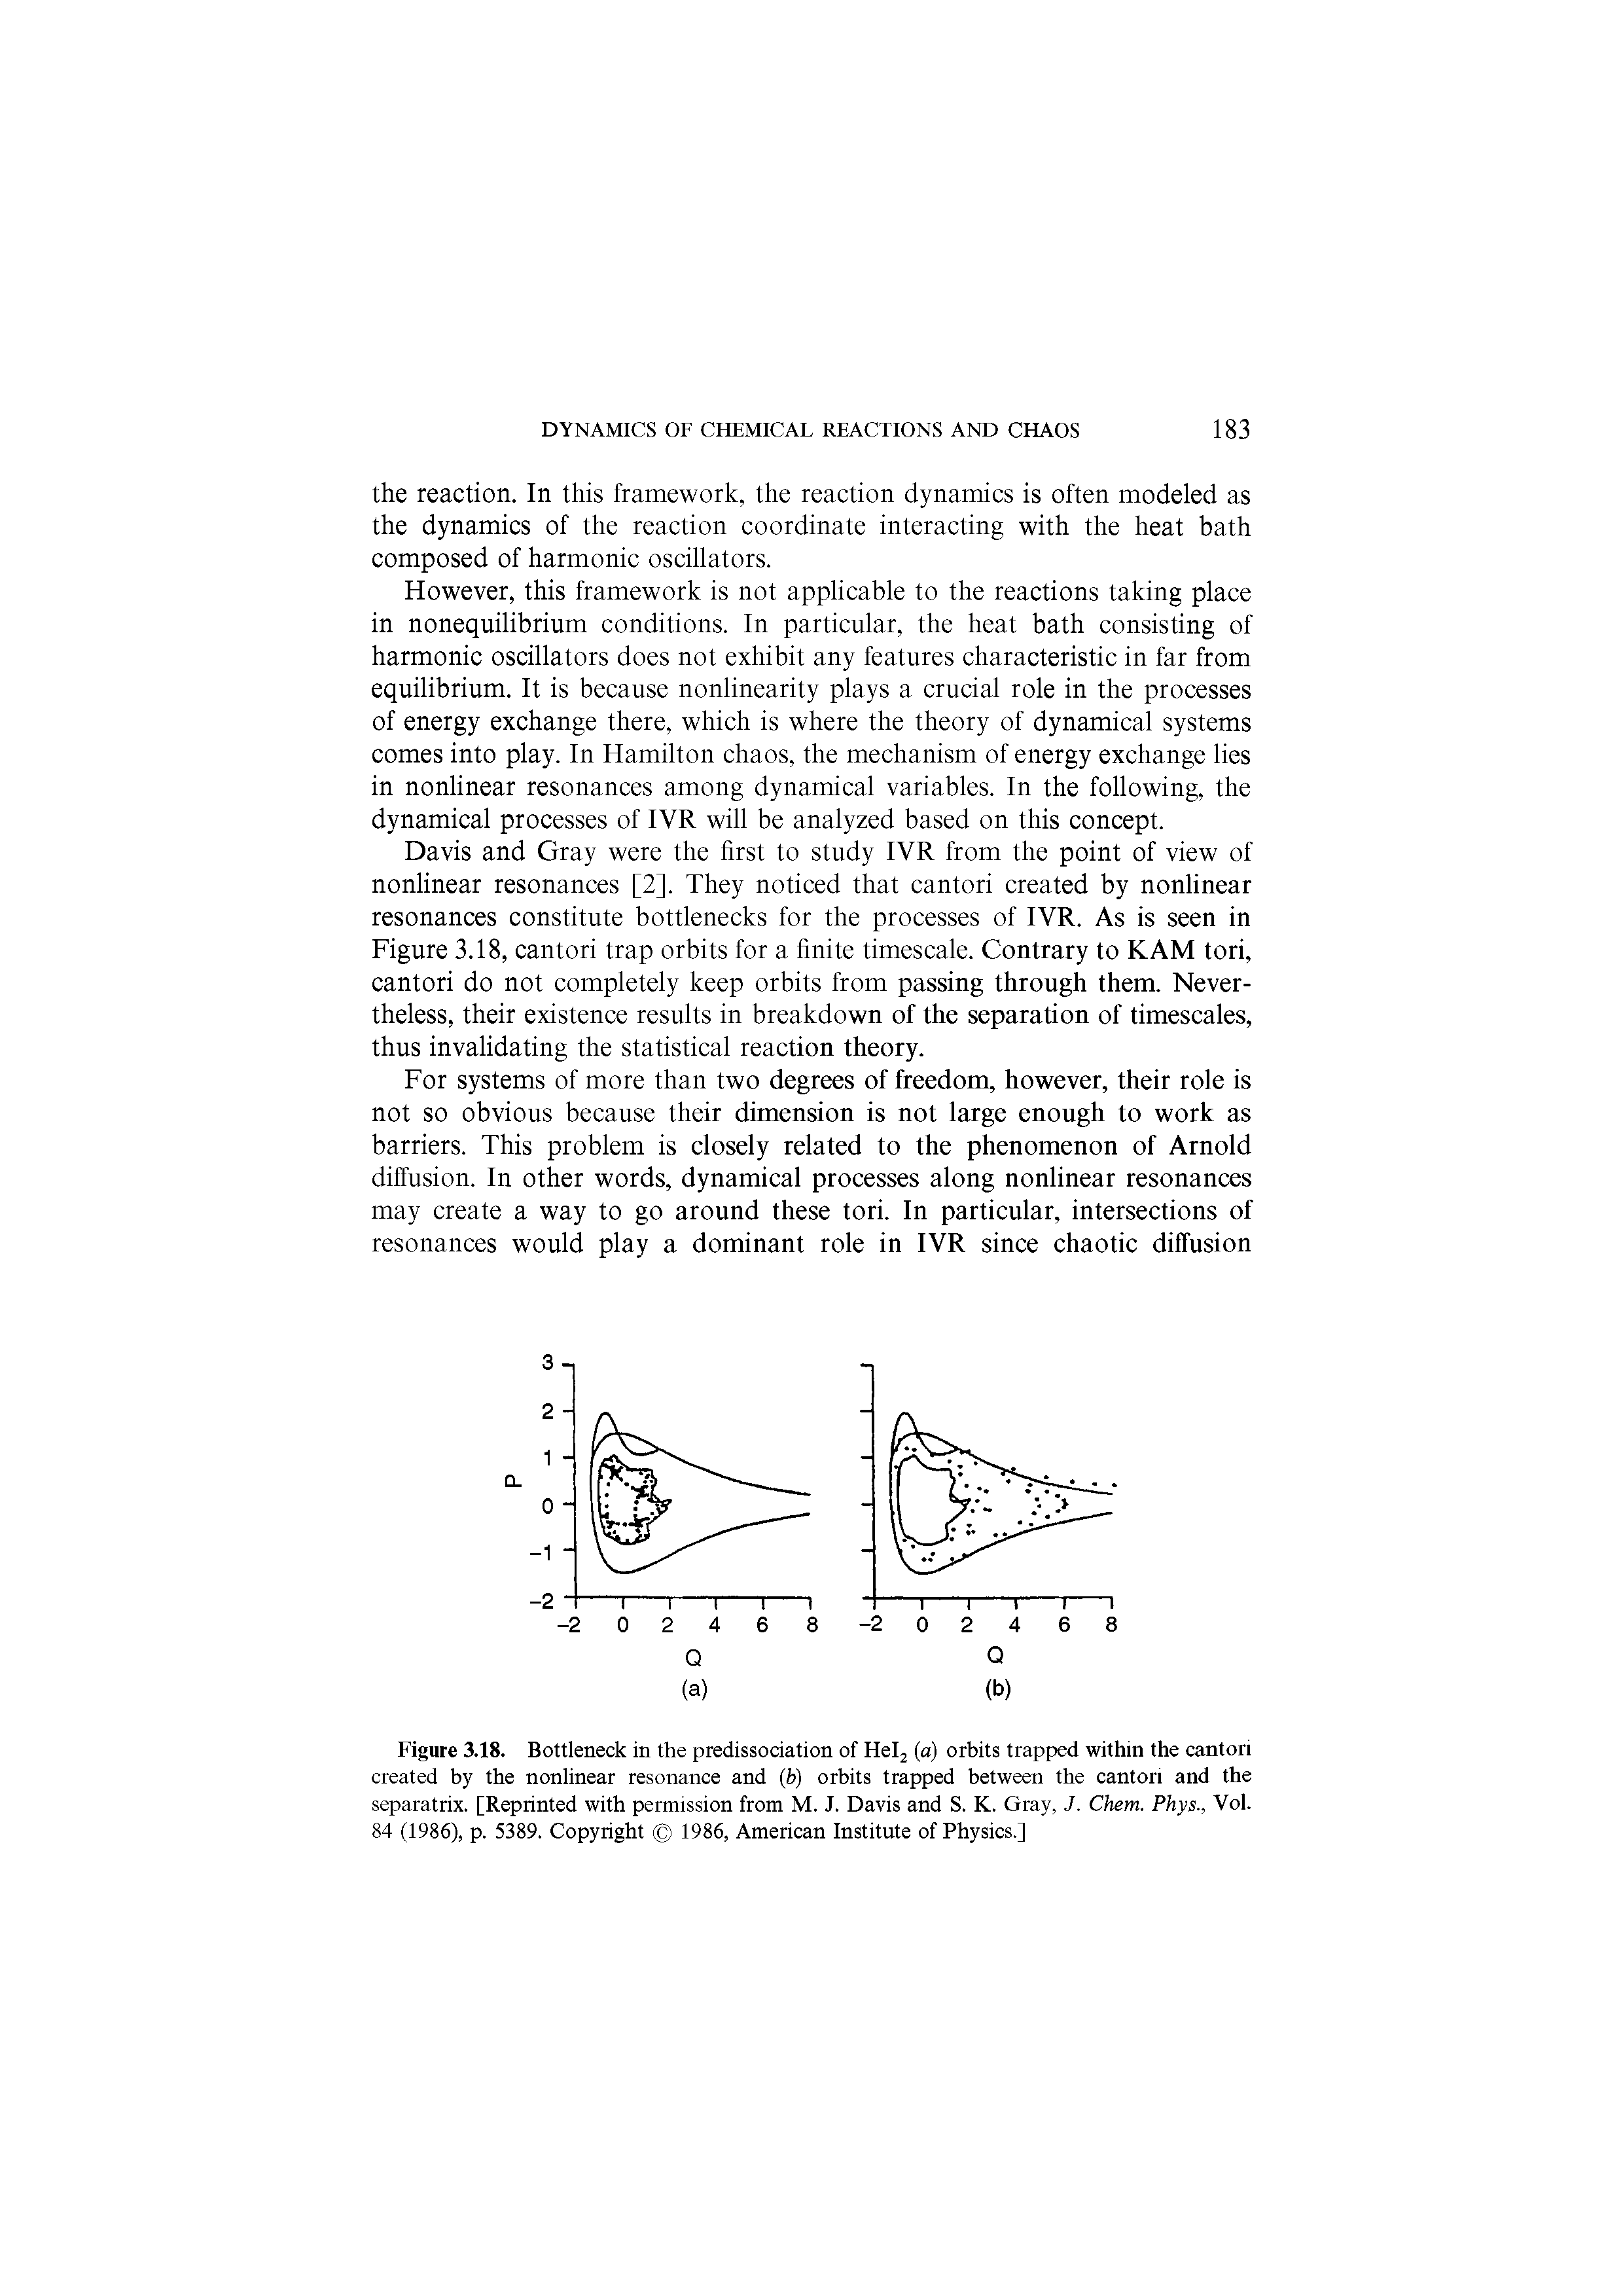 Figure 3.18. Bottleneck in the predissodation of Helj (a) orbits trapped within the cantori created by the nonlinear resonance and (b) orbits trapped between the cantori and the separatrix. [Reprinted with permission from M. J. Davis and S. K. Gray, J. Chem. Phys., Vol. 84 (1986), p. 5389. Copyright 1986, American Institute of Physics.]...